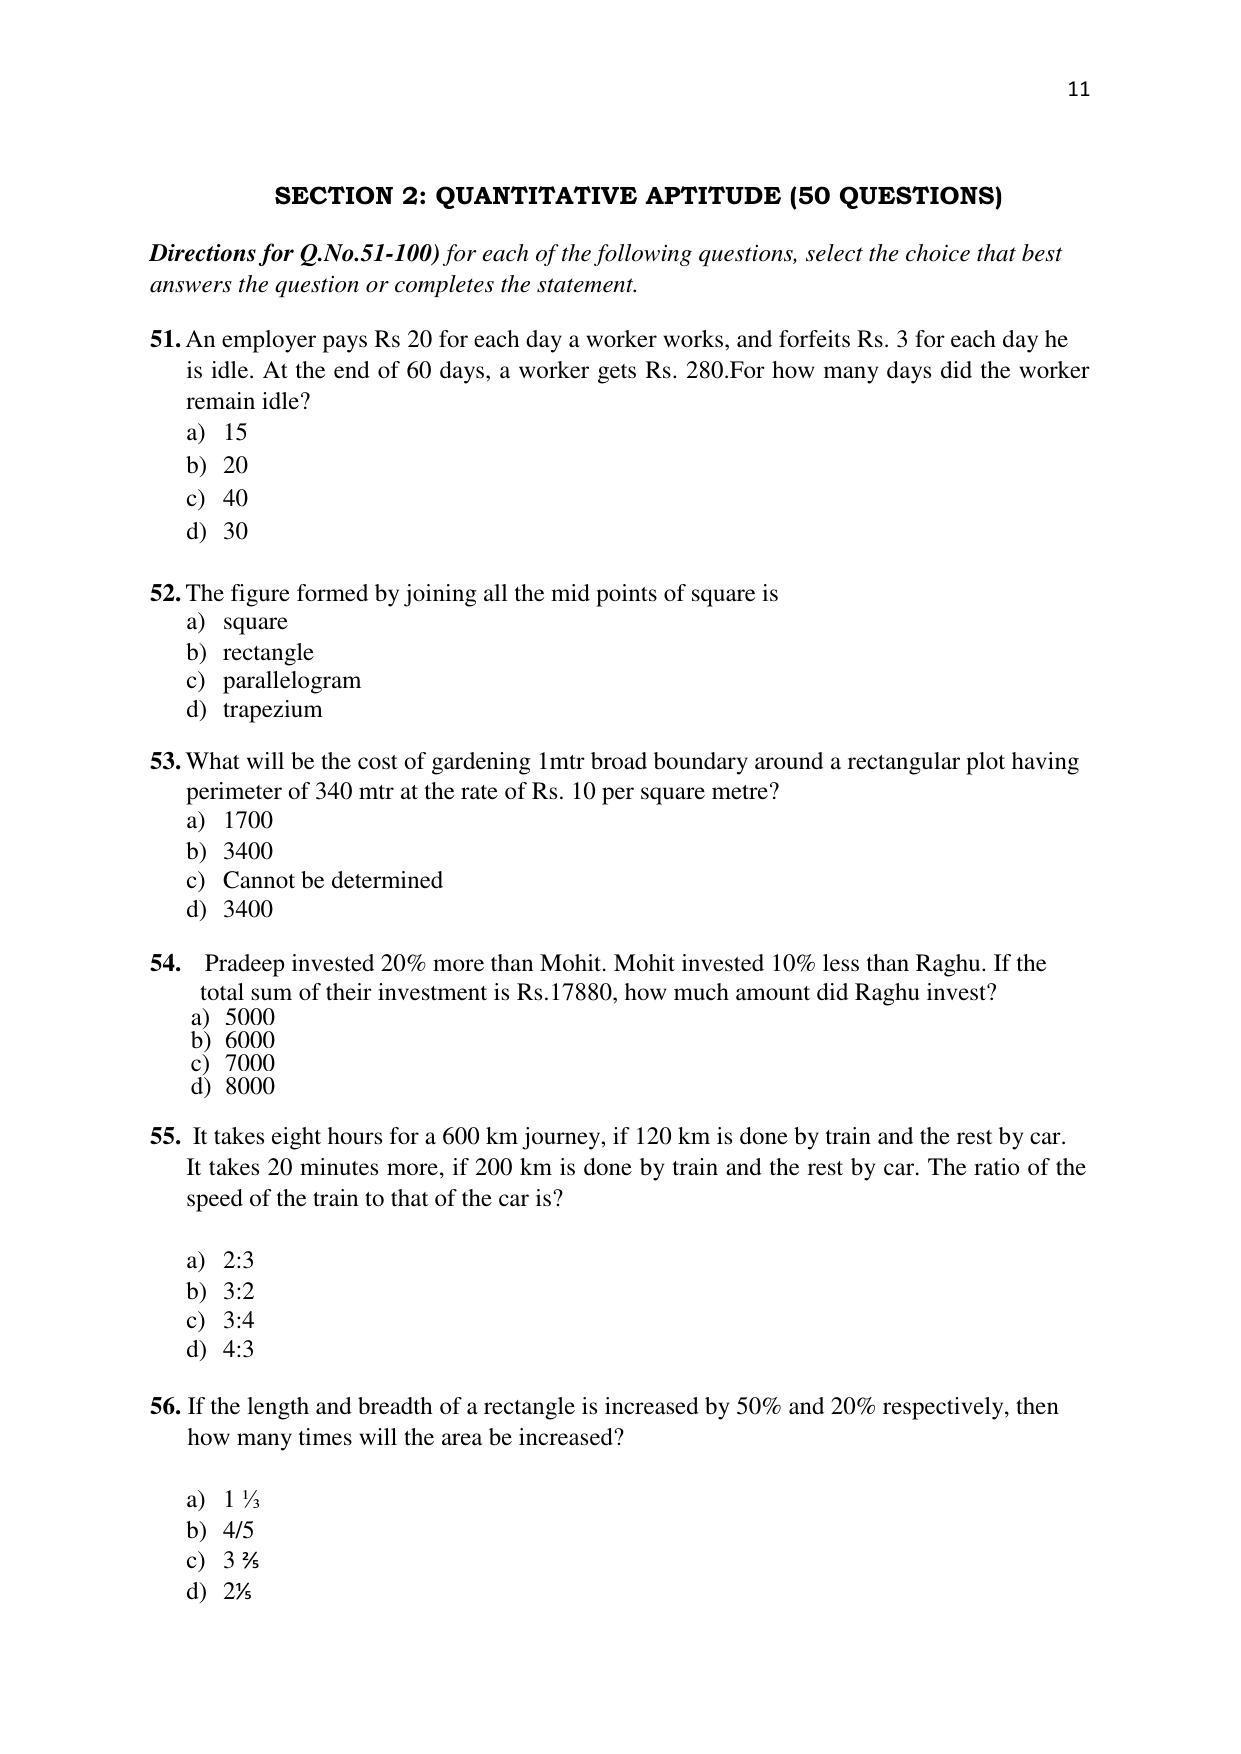 KMAT Question Papers - November 2016 - Page 11